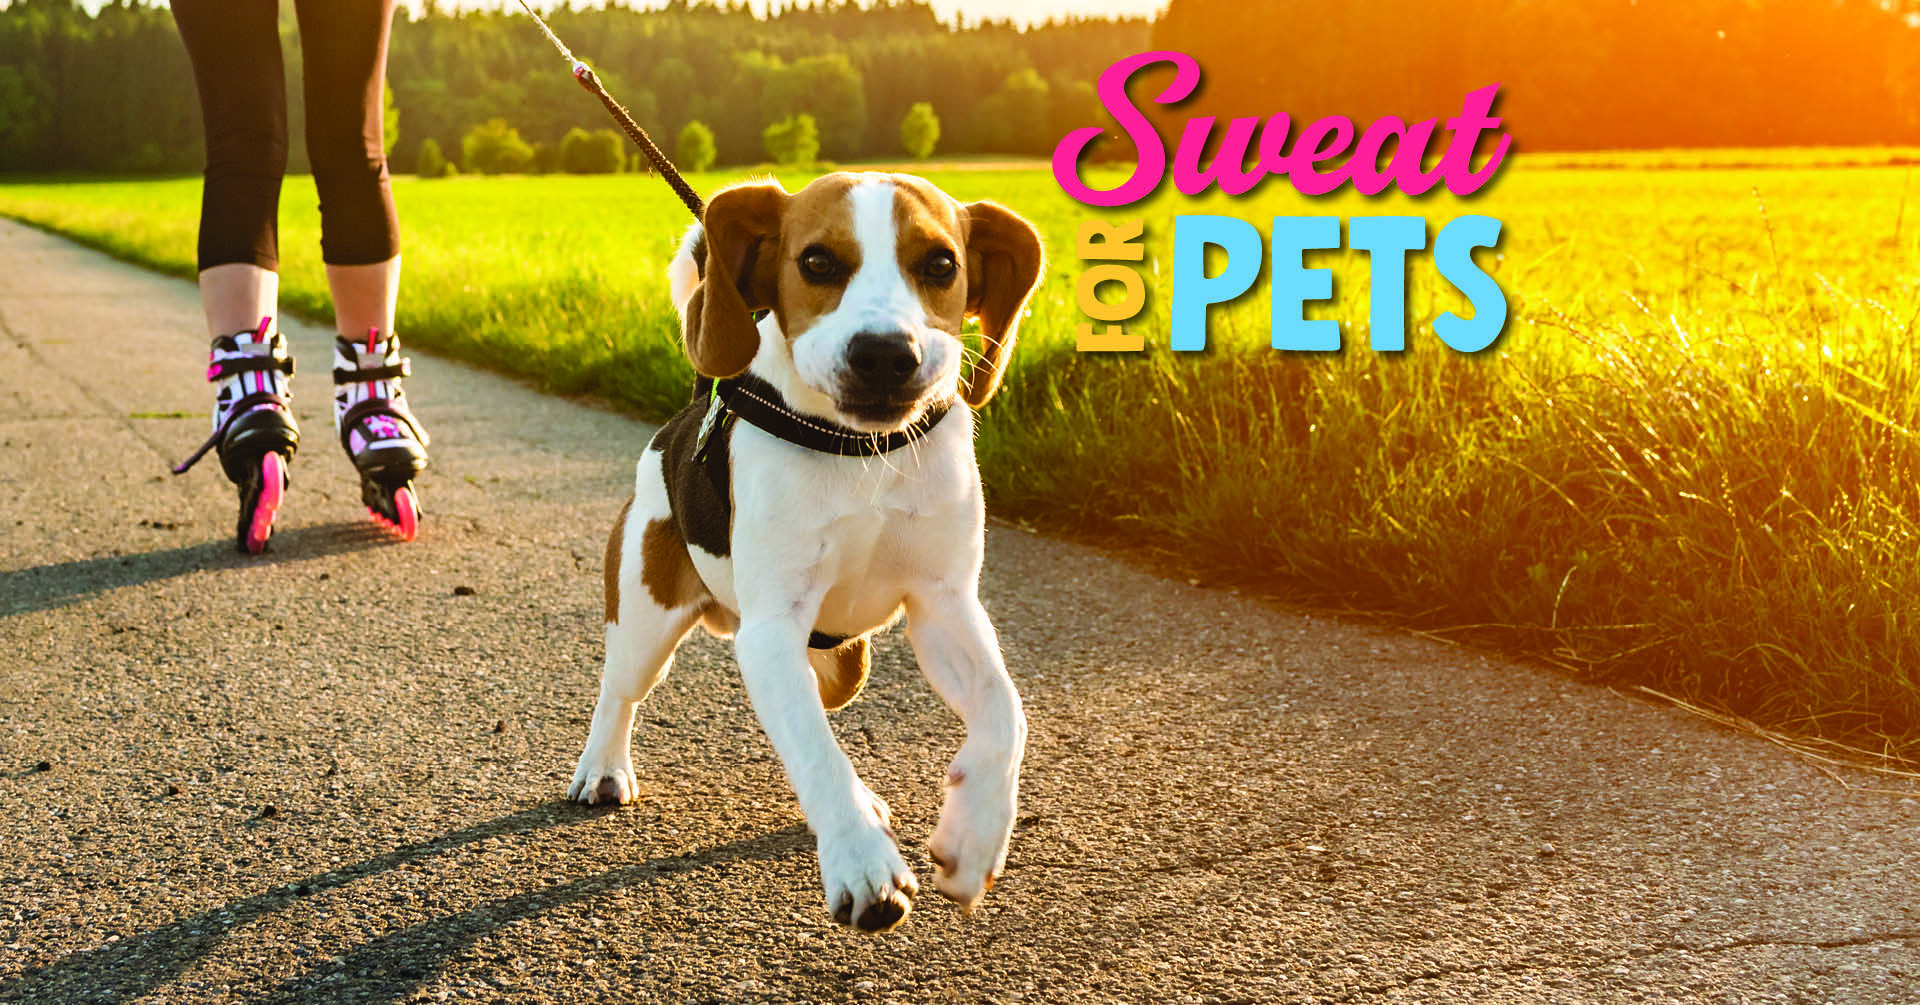 Sweat for Pets Facebook Cover Photo